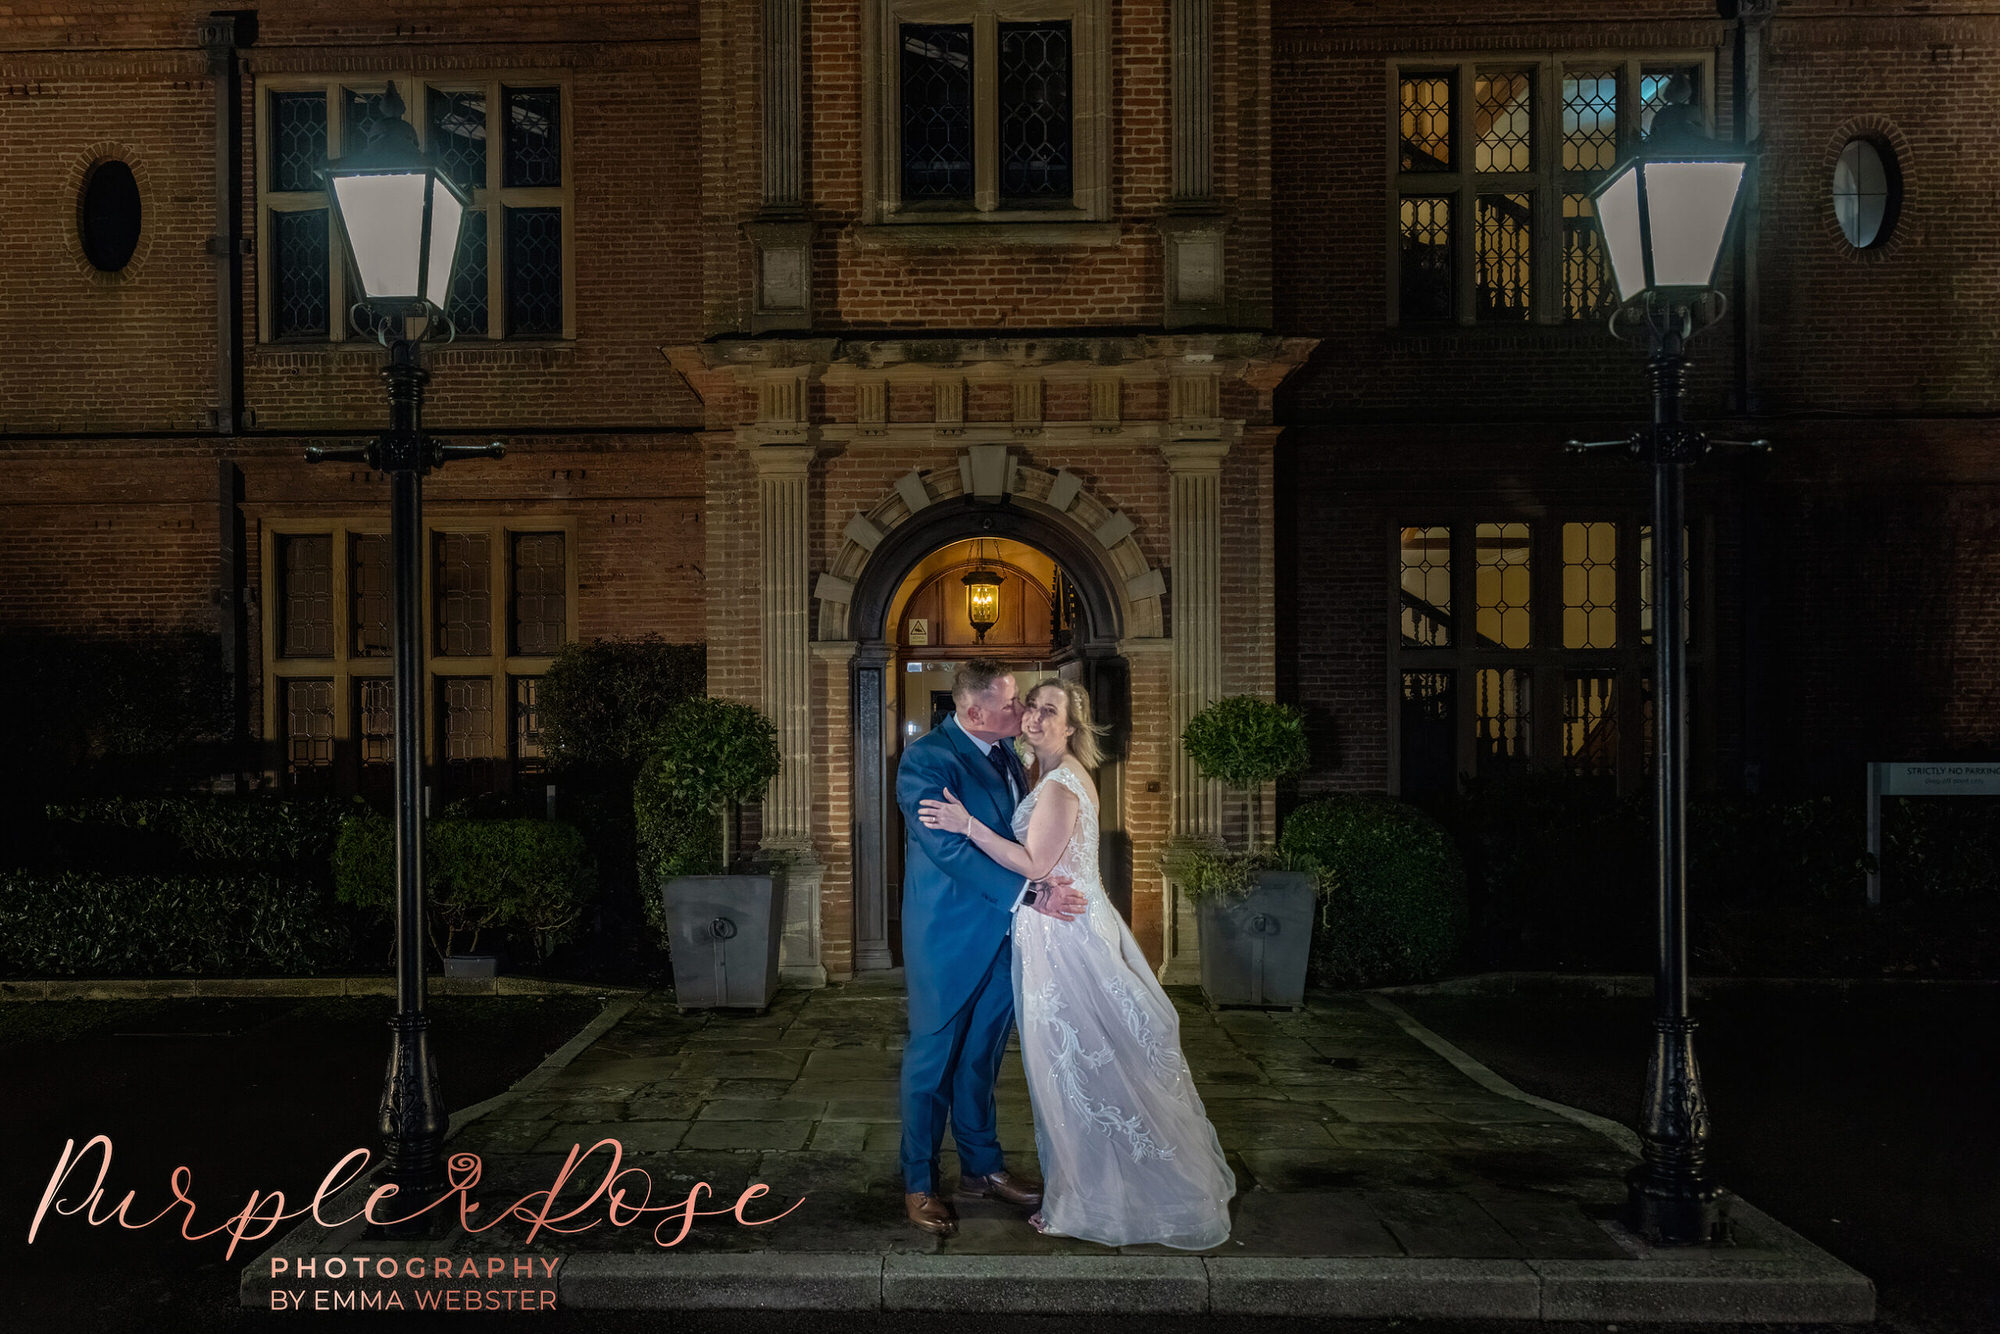 Bride and groom at night in front of their wedding venue